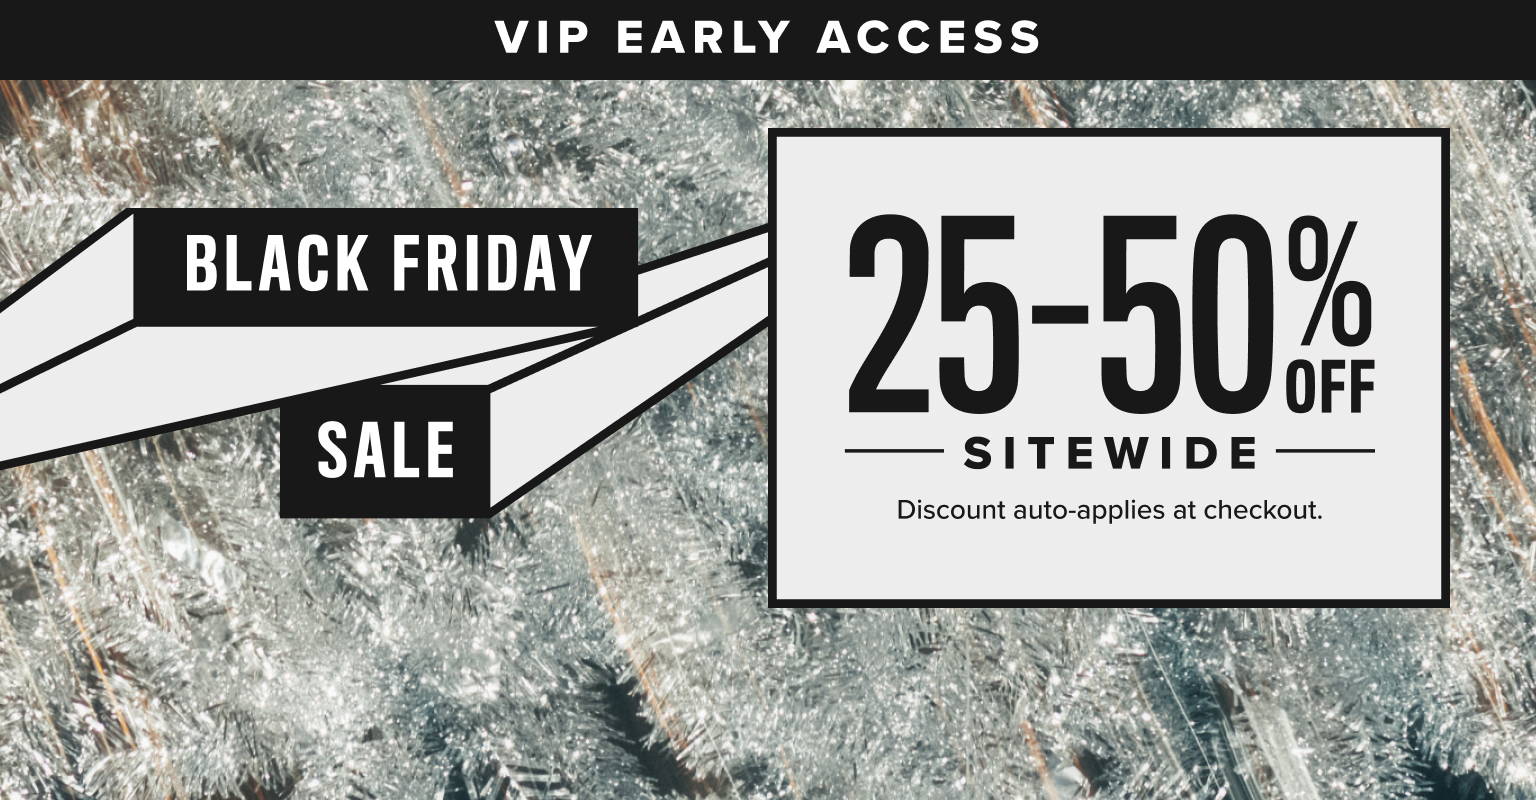 VIP Early Access. Black Friday Sale 25-50% Off site wide, 